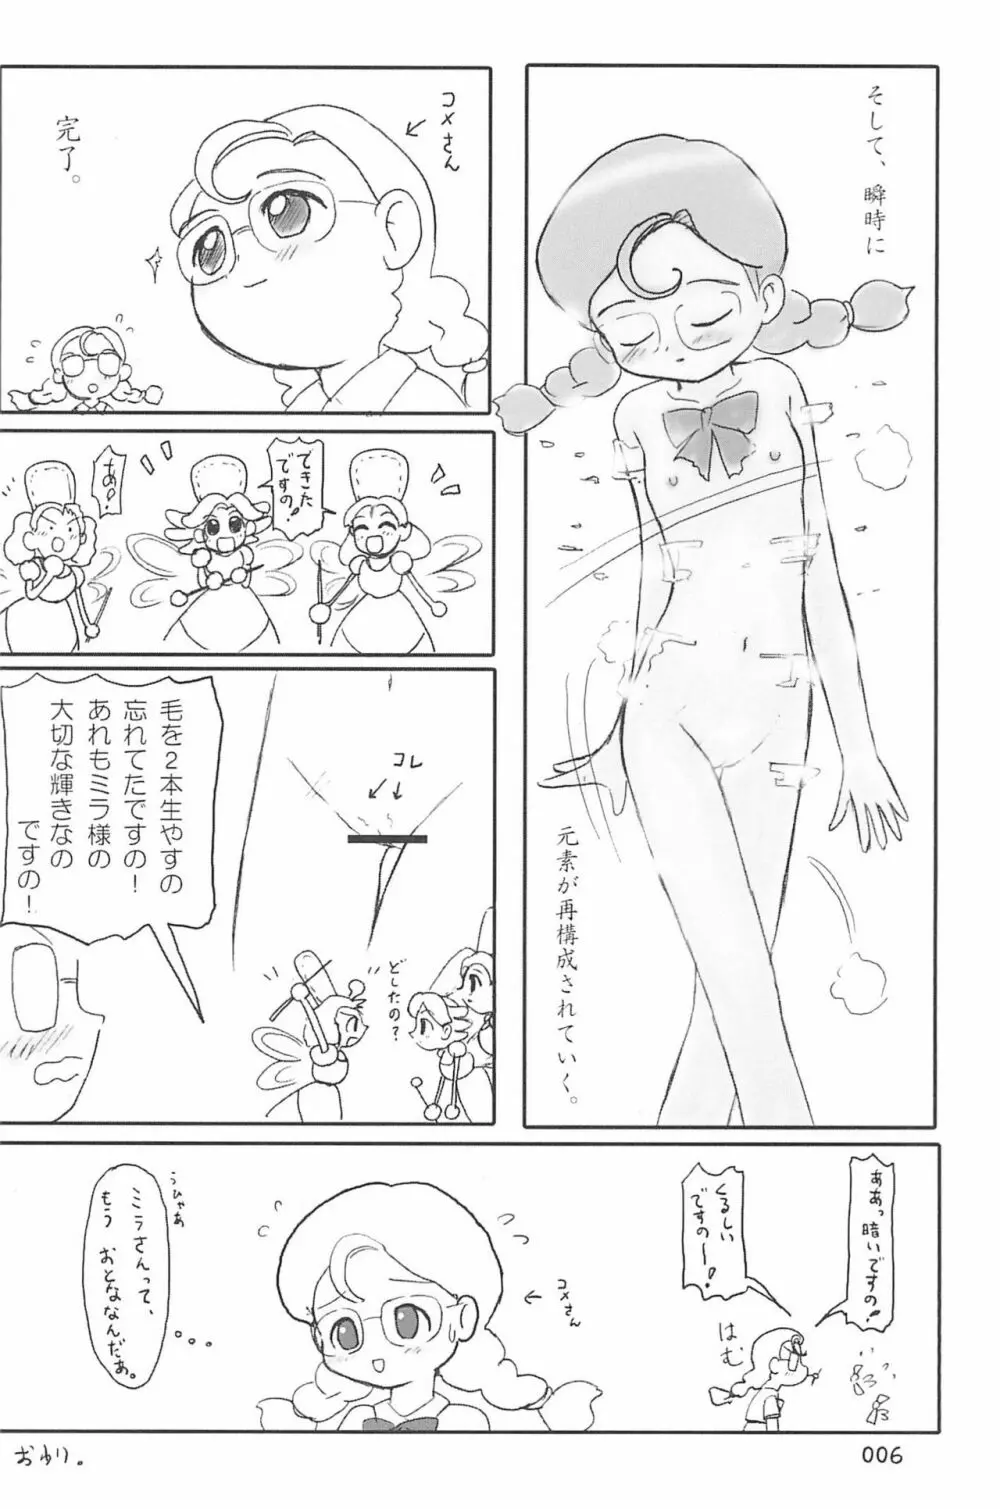 ND-special Volume 4 6ページ